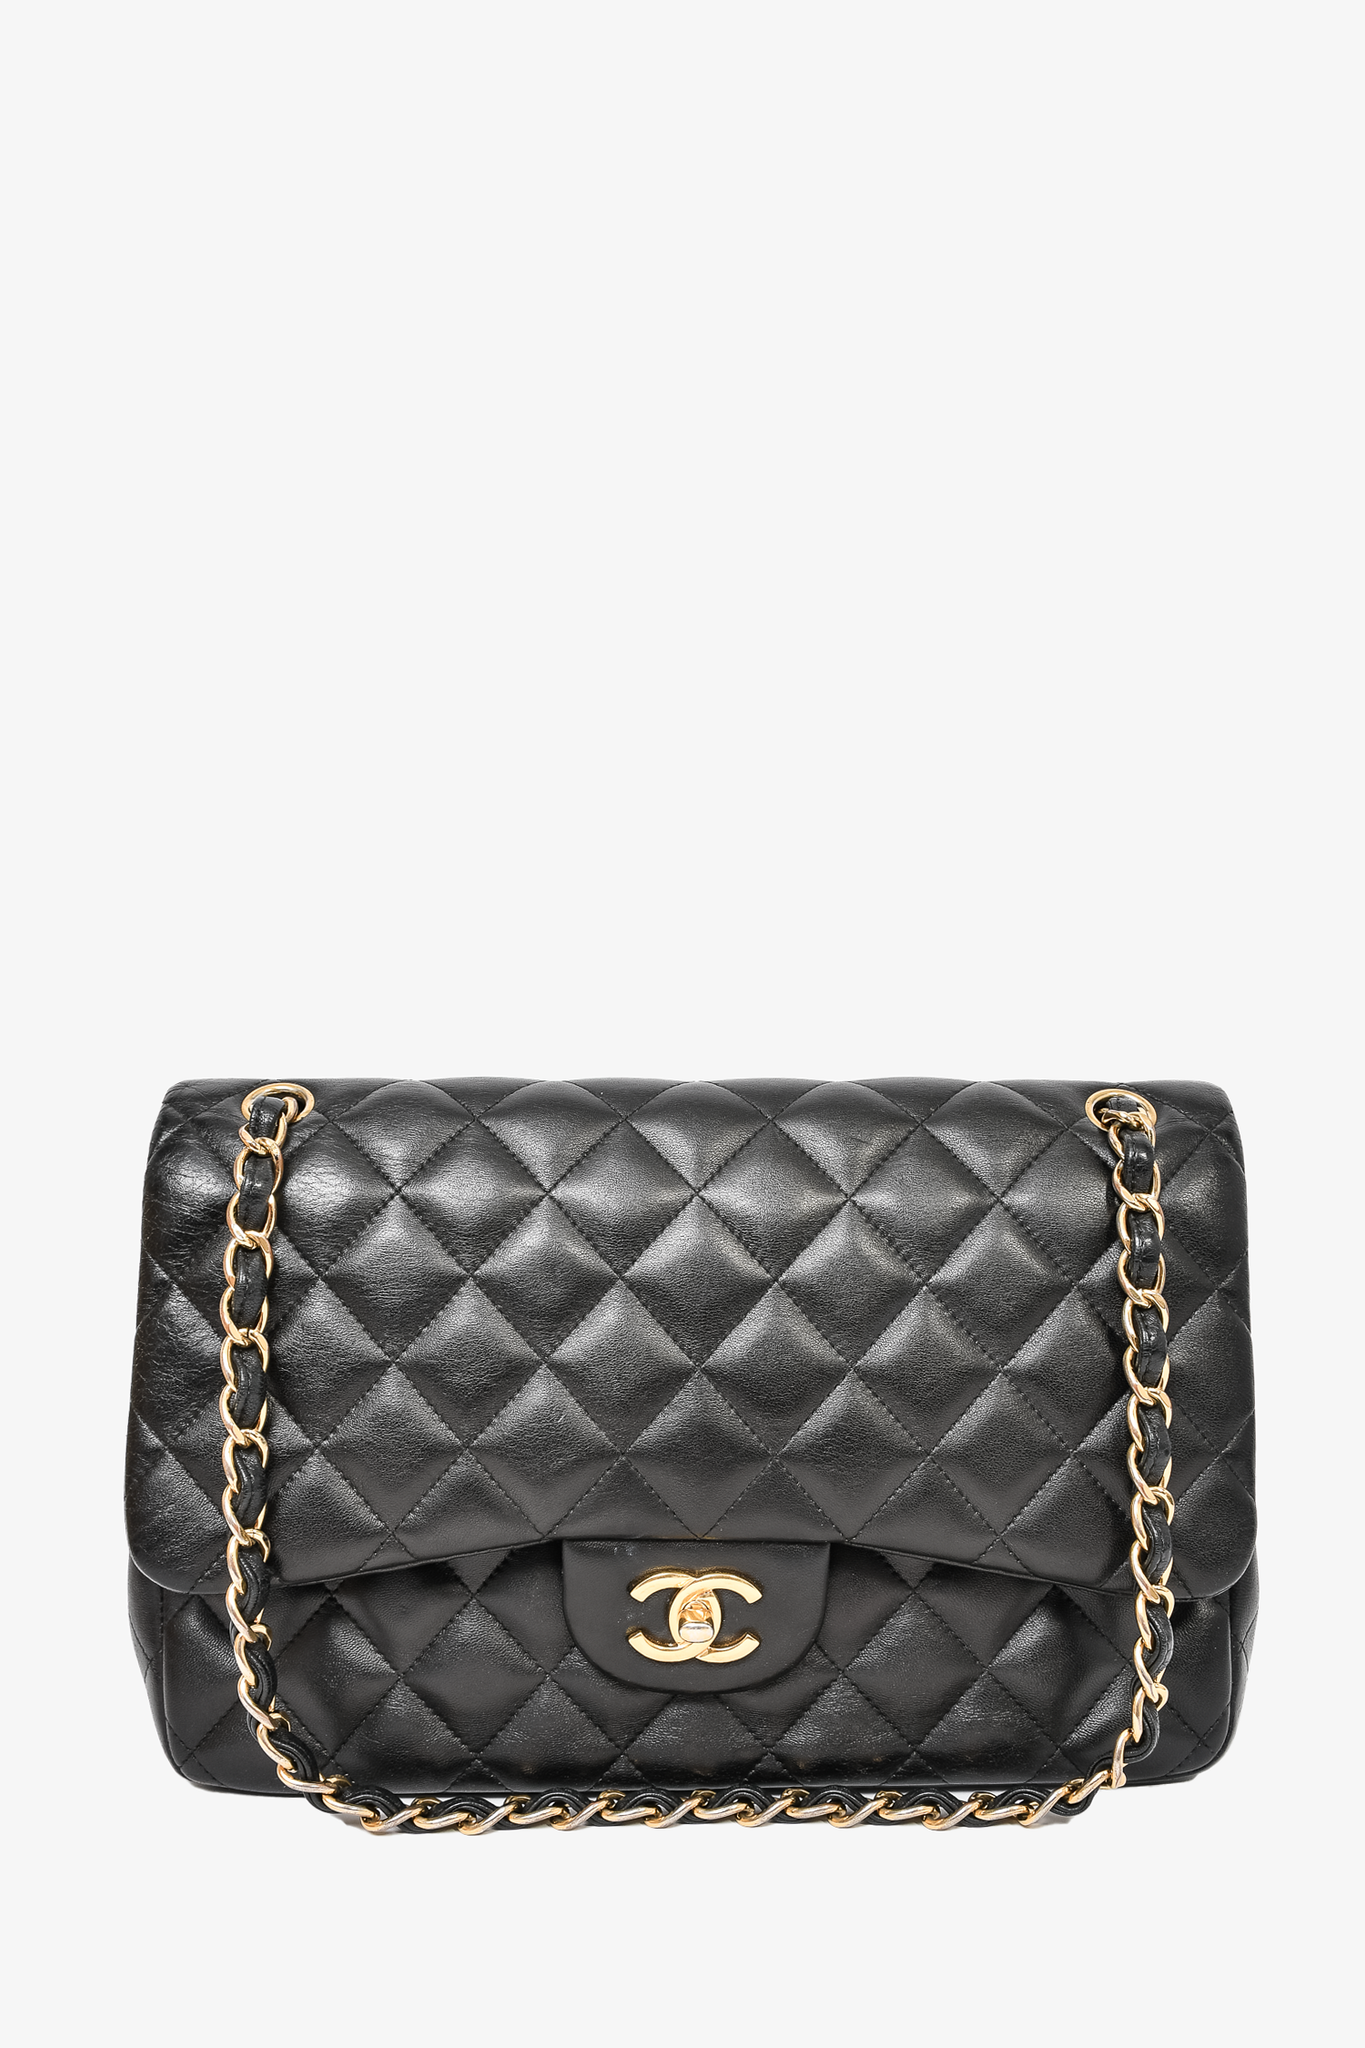 Chanel Medium Double Flap Striped Patent Leather Bag